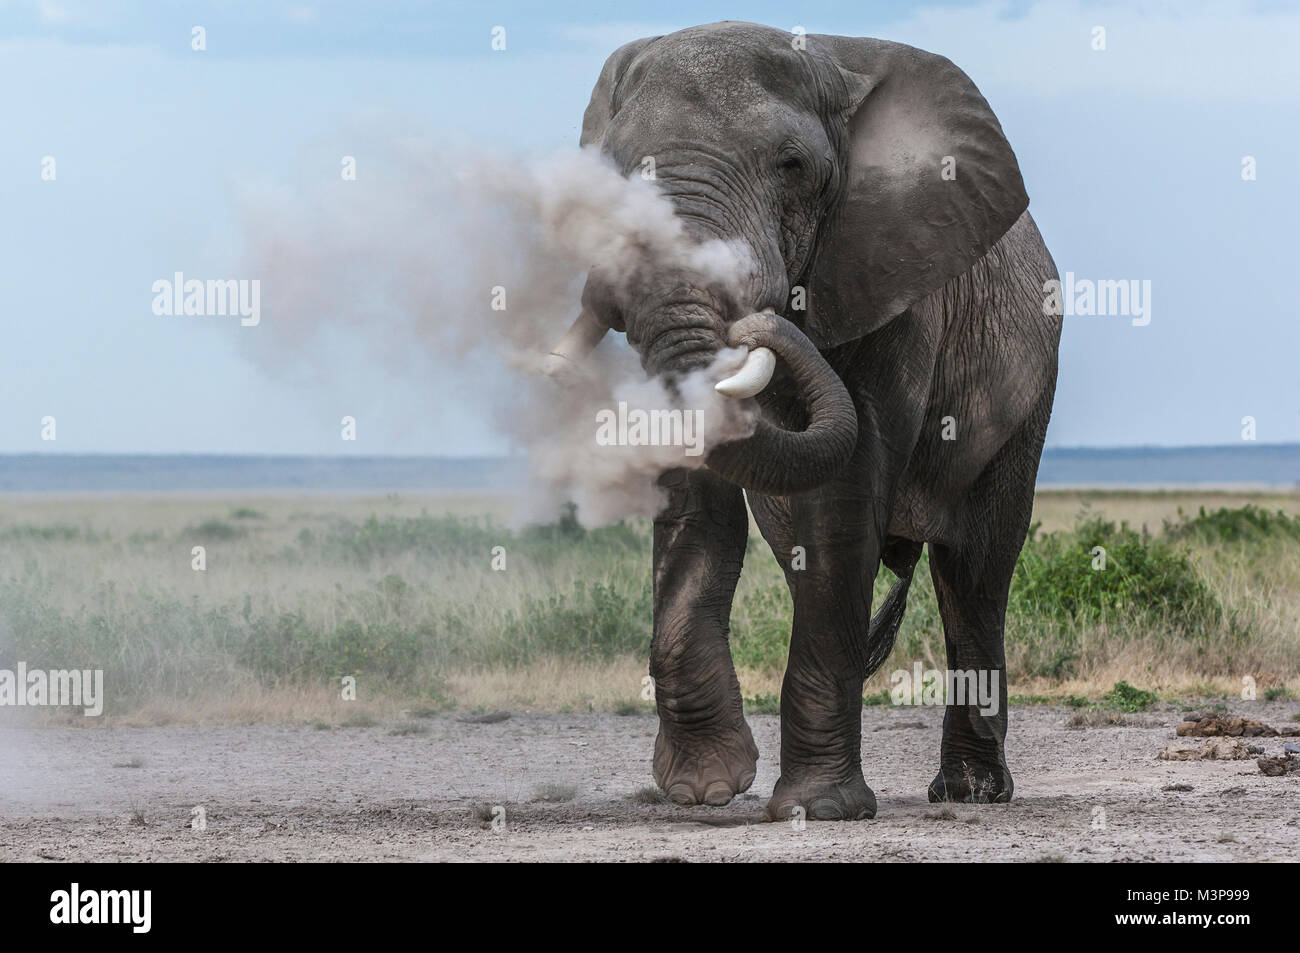 An African elephant bull (Loxodonta africana) blowing dust through his trunk and over his face; Amboseli National Park, Kenya Stock Photo